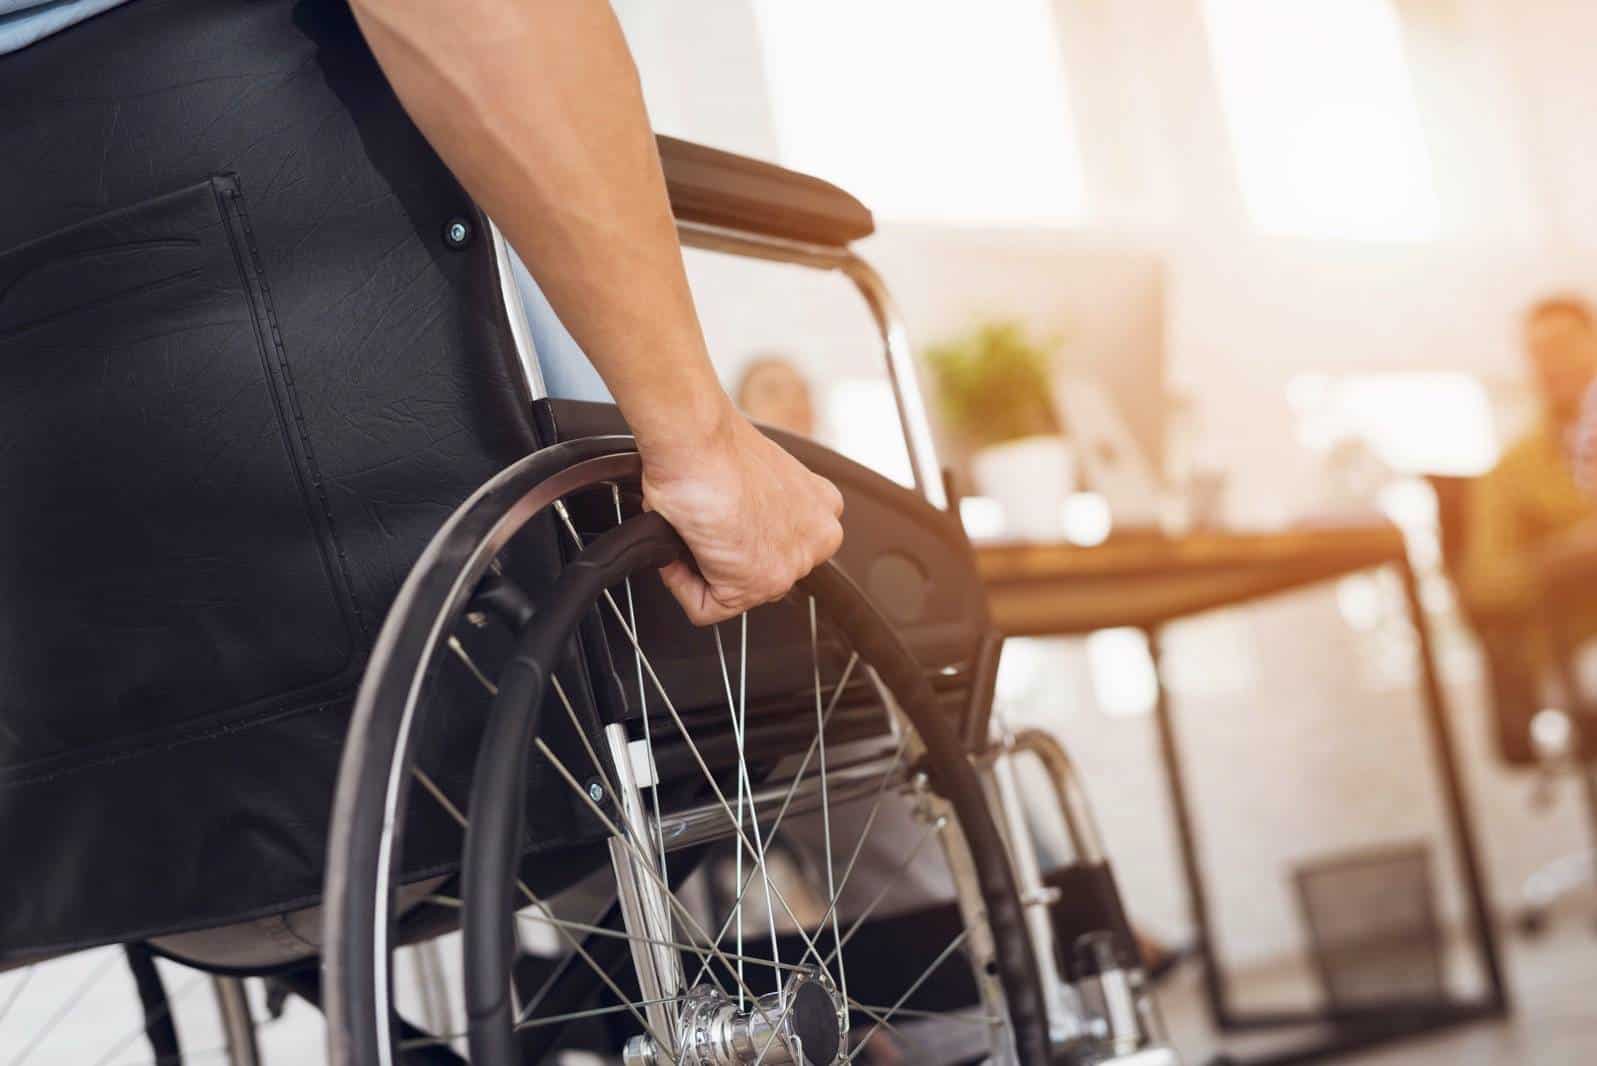 Those Who Use Wheelchairs With Injuries Needed Repair In The Past Six Months